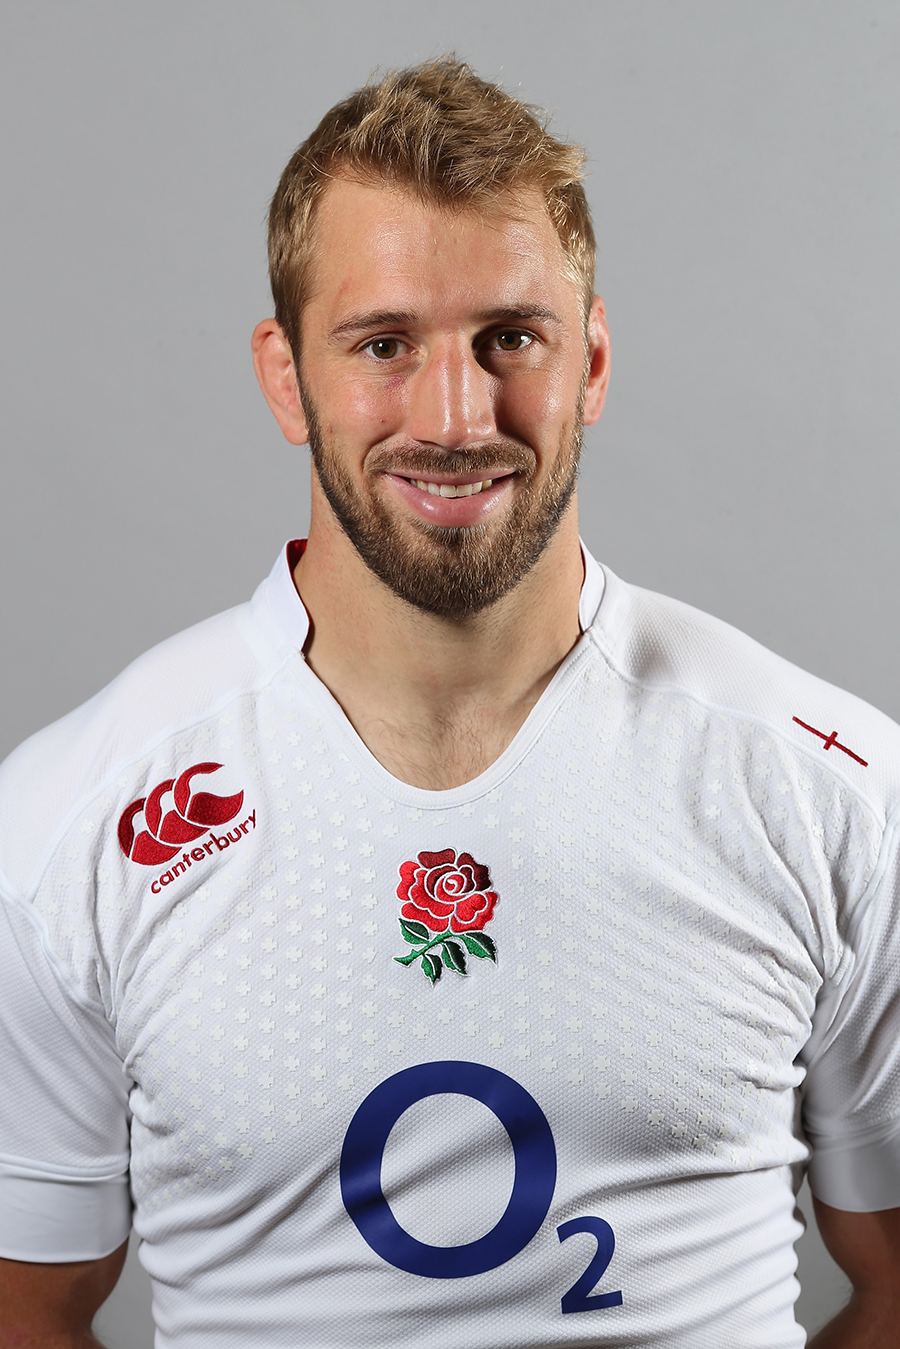 Chris Robshaw poses for a portrait at the Pennyhill Park Hotel